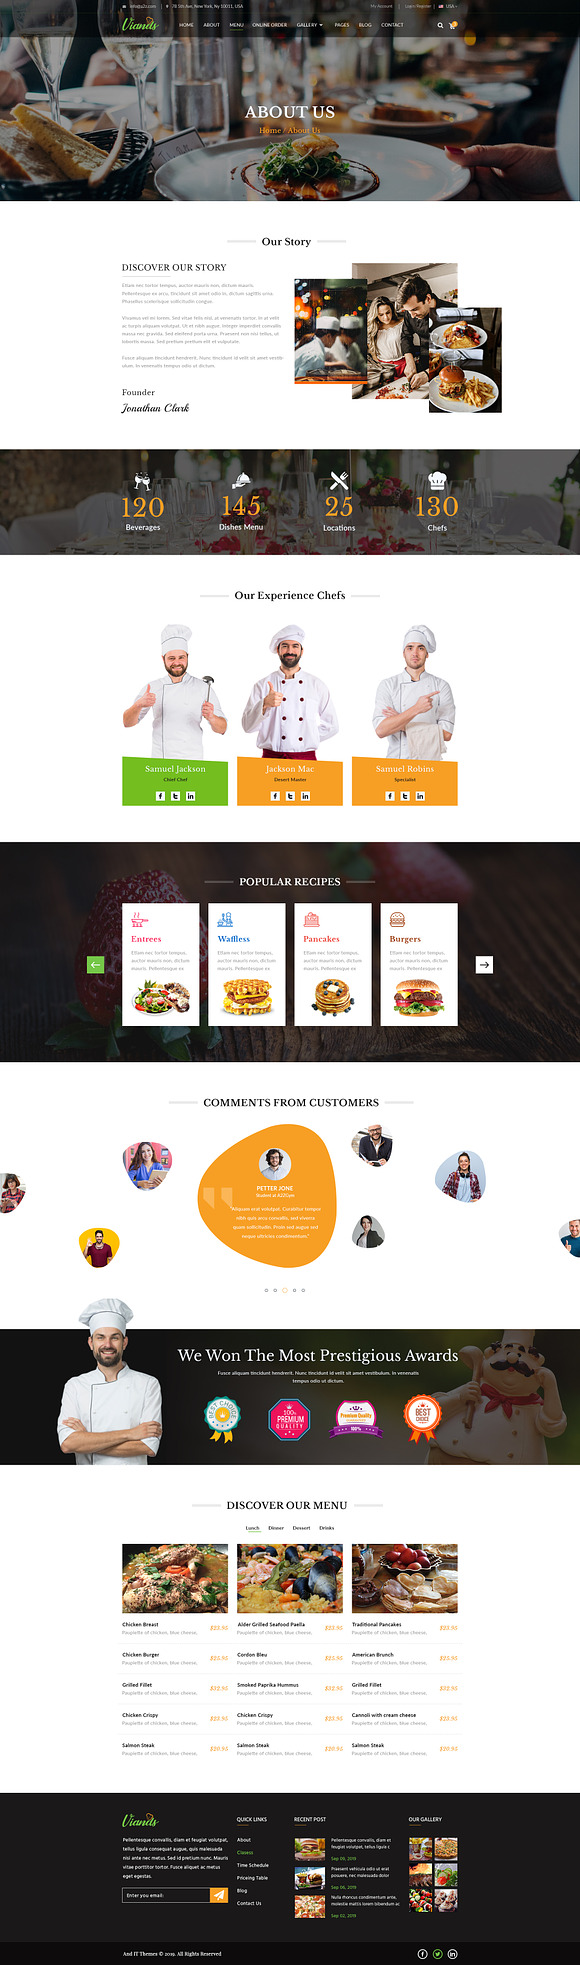 Viands Restaurant PSD Template in Landing Page Templates - product preview 8